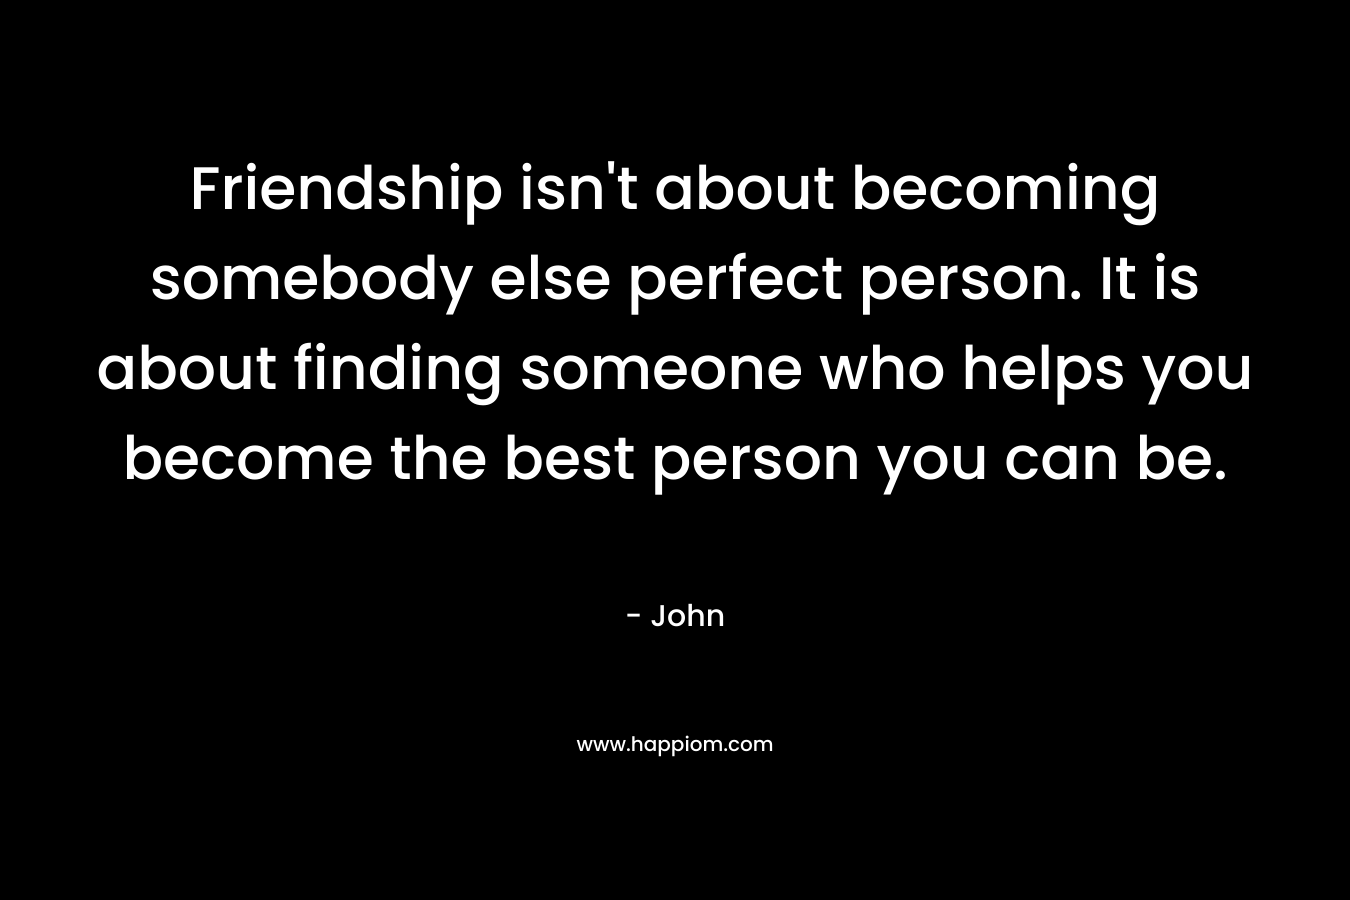 Friendship isn't about becoming somebody else perfect person. It is about finding someone who helps you become the best person you can be.